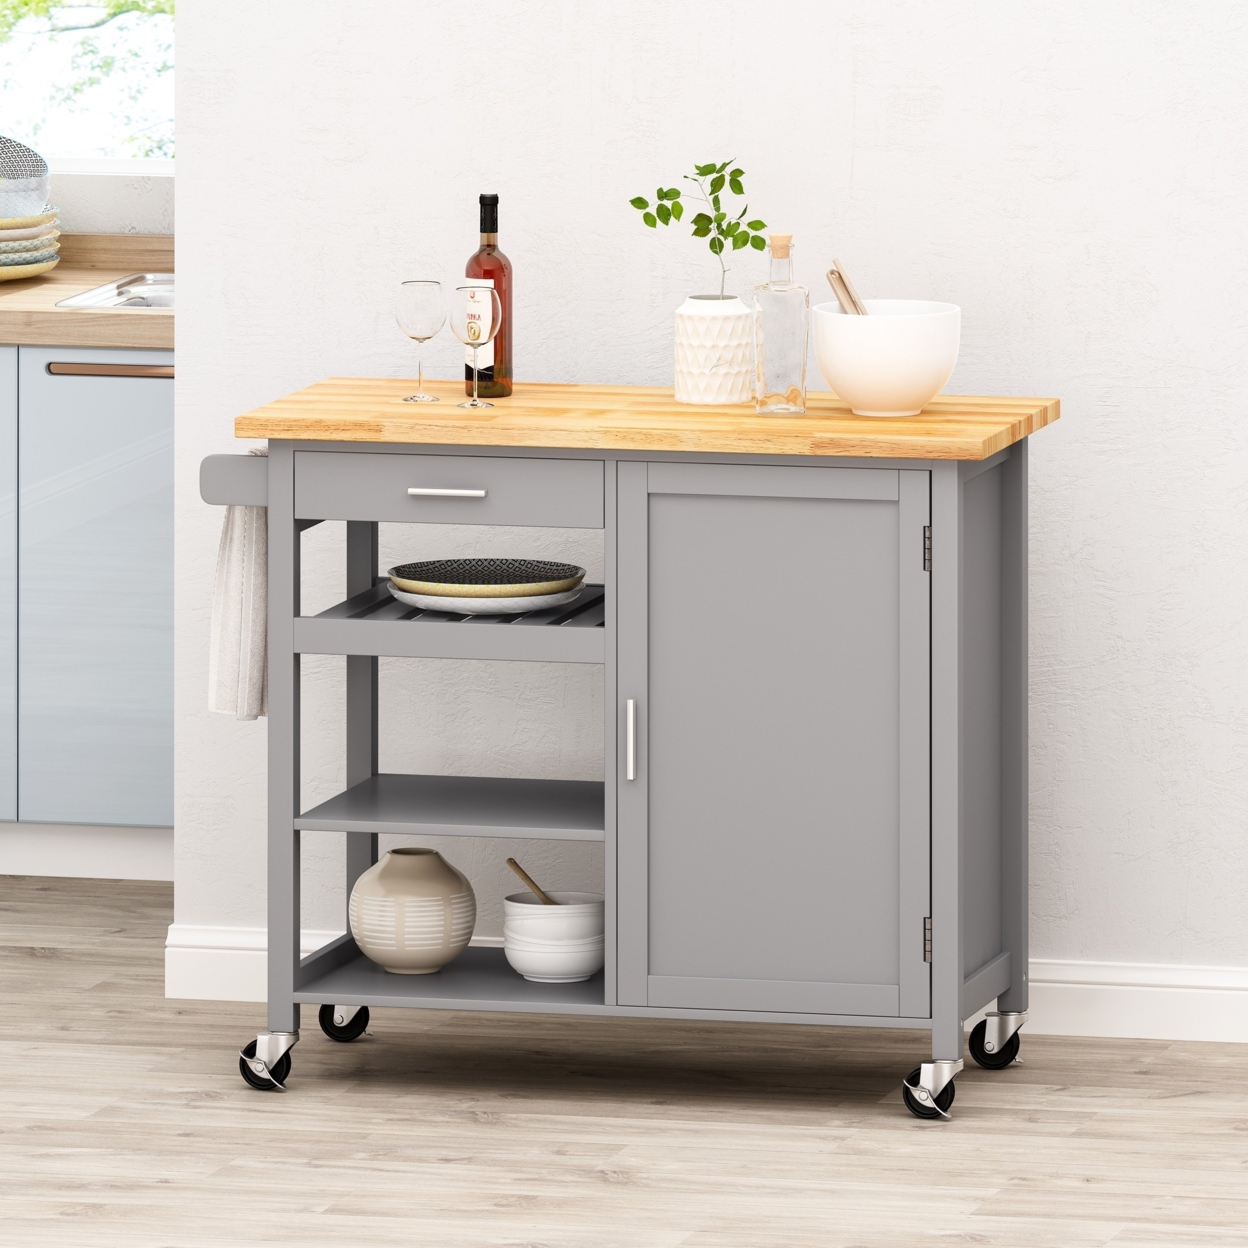 Carmelina Contemporary Kitchen Cart With Wheels - White/natural